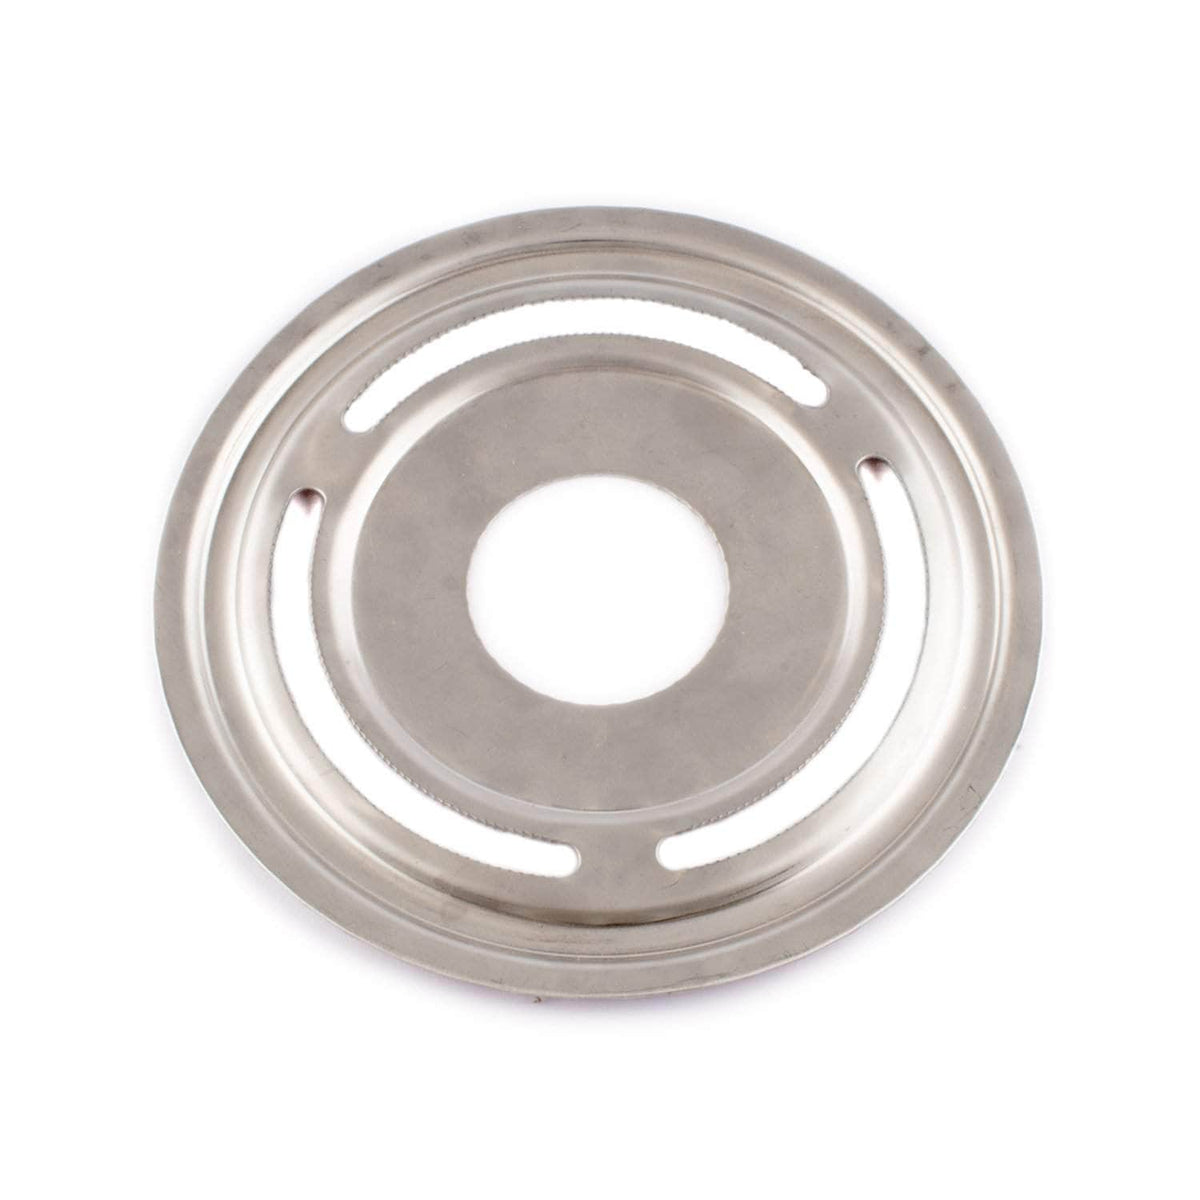 Burner shell lid (top hat) for use with oil Aga range cookers